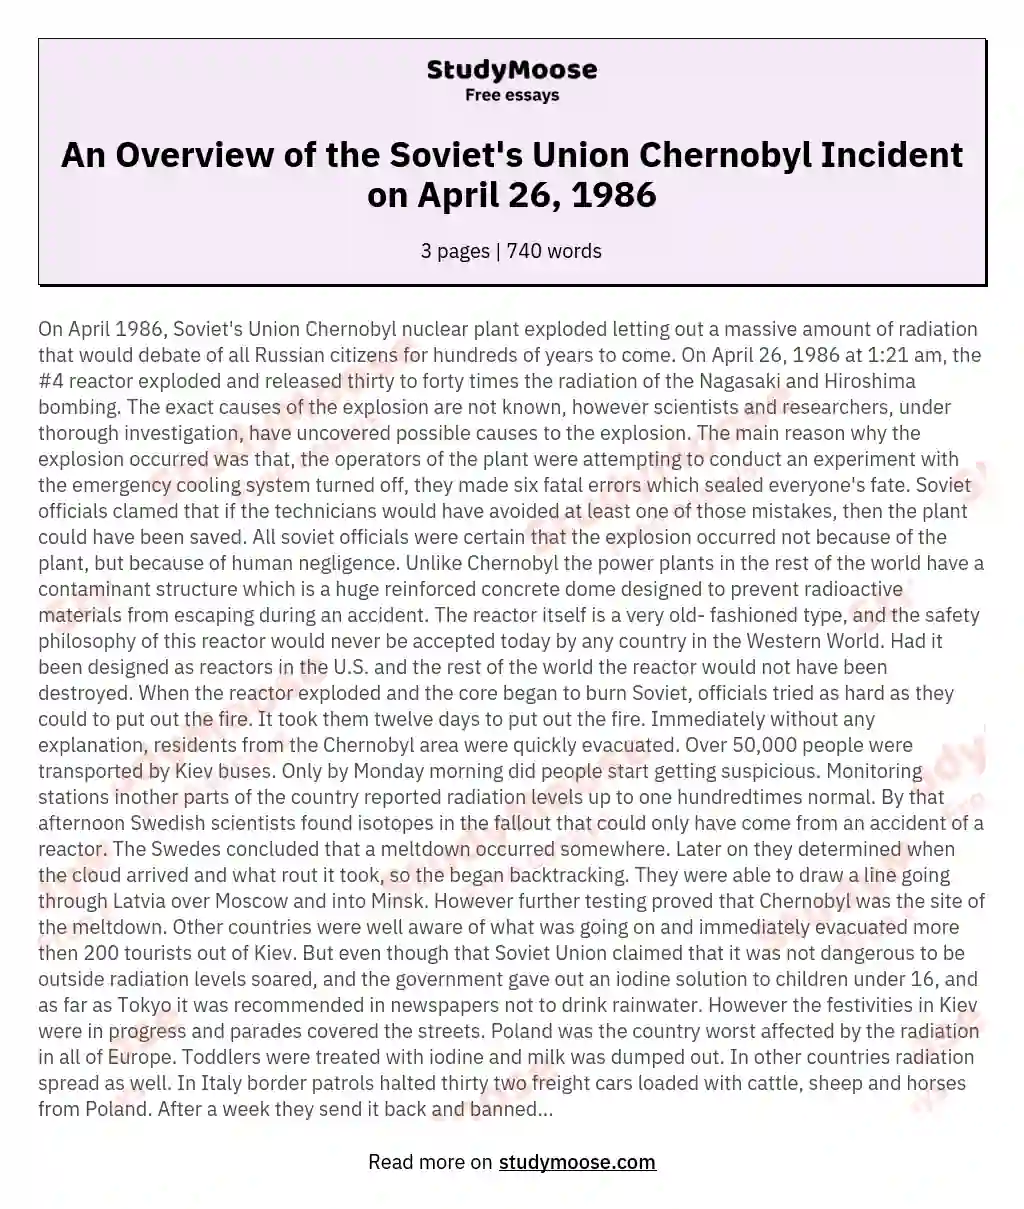 An Overview of the Soviet's Union Chernobyl Incident on April 26, 1986 essay